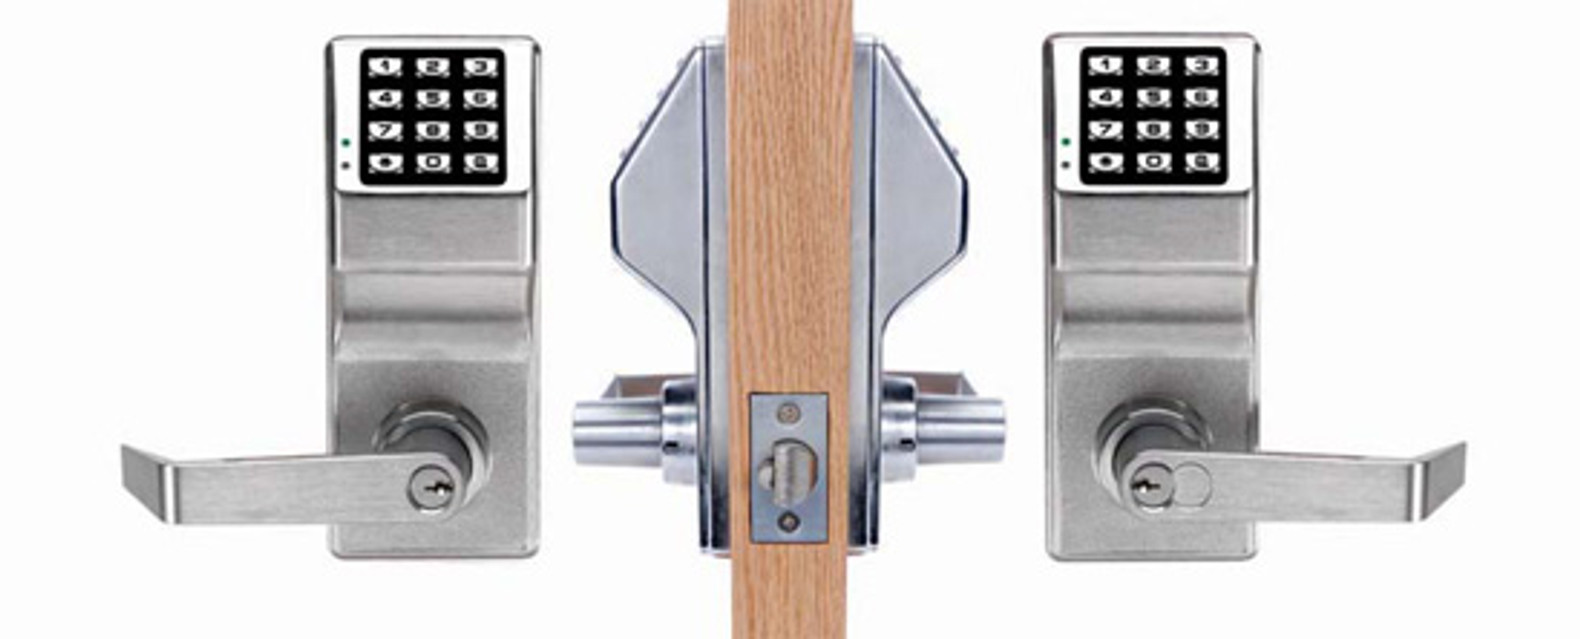 Alarm Lock Doublesided Trilogy Electronic keypad door lock with PIN-code  access (100 users)